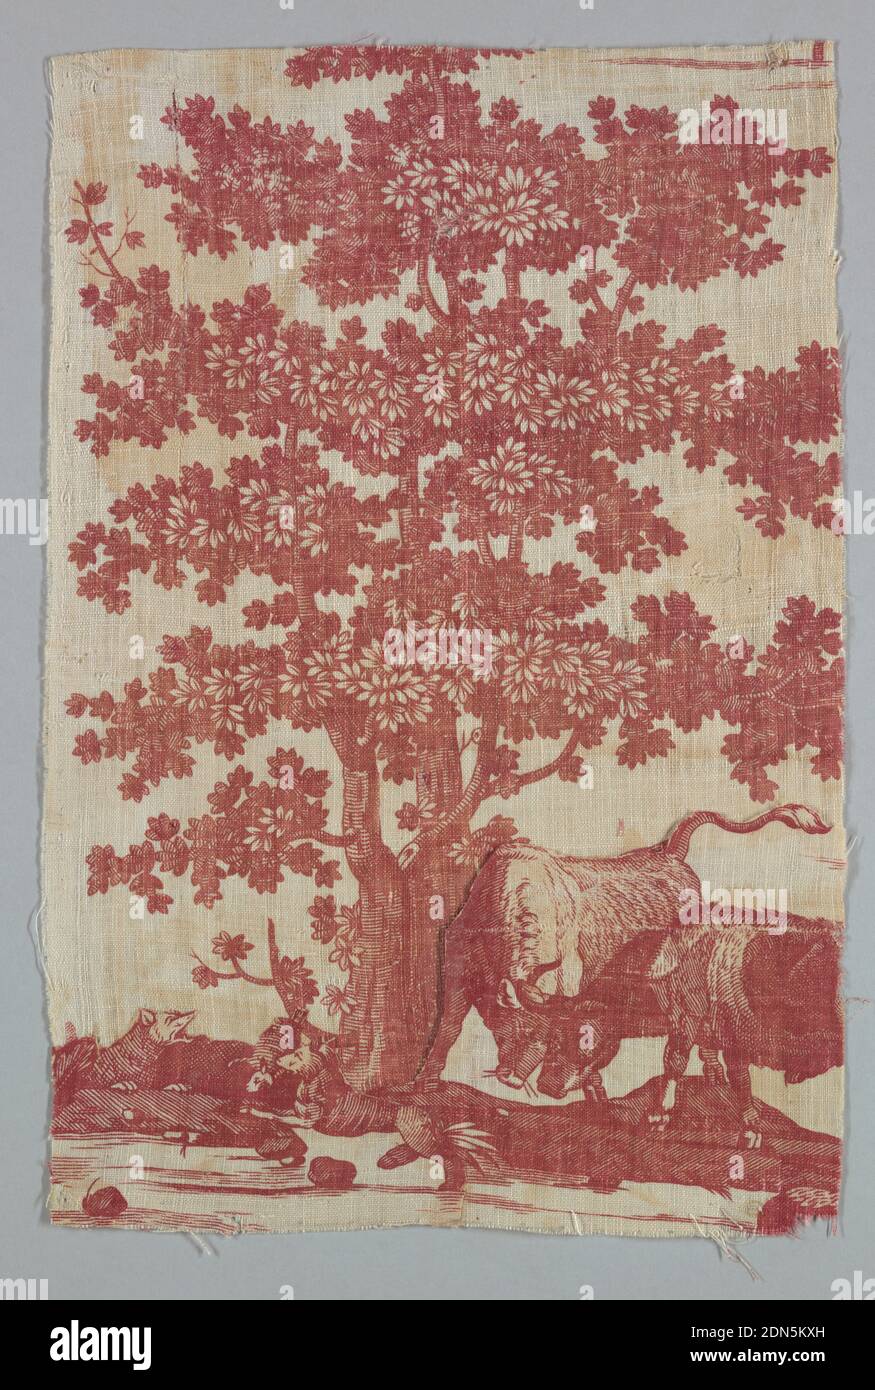 Fragment, Medium: cotton Technique: printed on plain weave, Fragment shows a large leafy tree with two grazing cows beneath it. At left, two barking dogs. In red on white ground., France, late 18th century, printed, dyed & painted textiles, Fragment Stock Photo